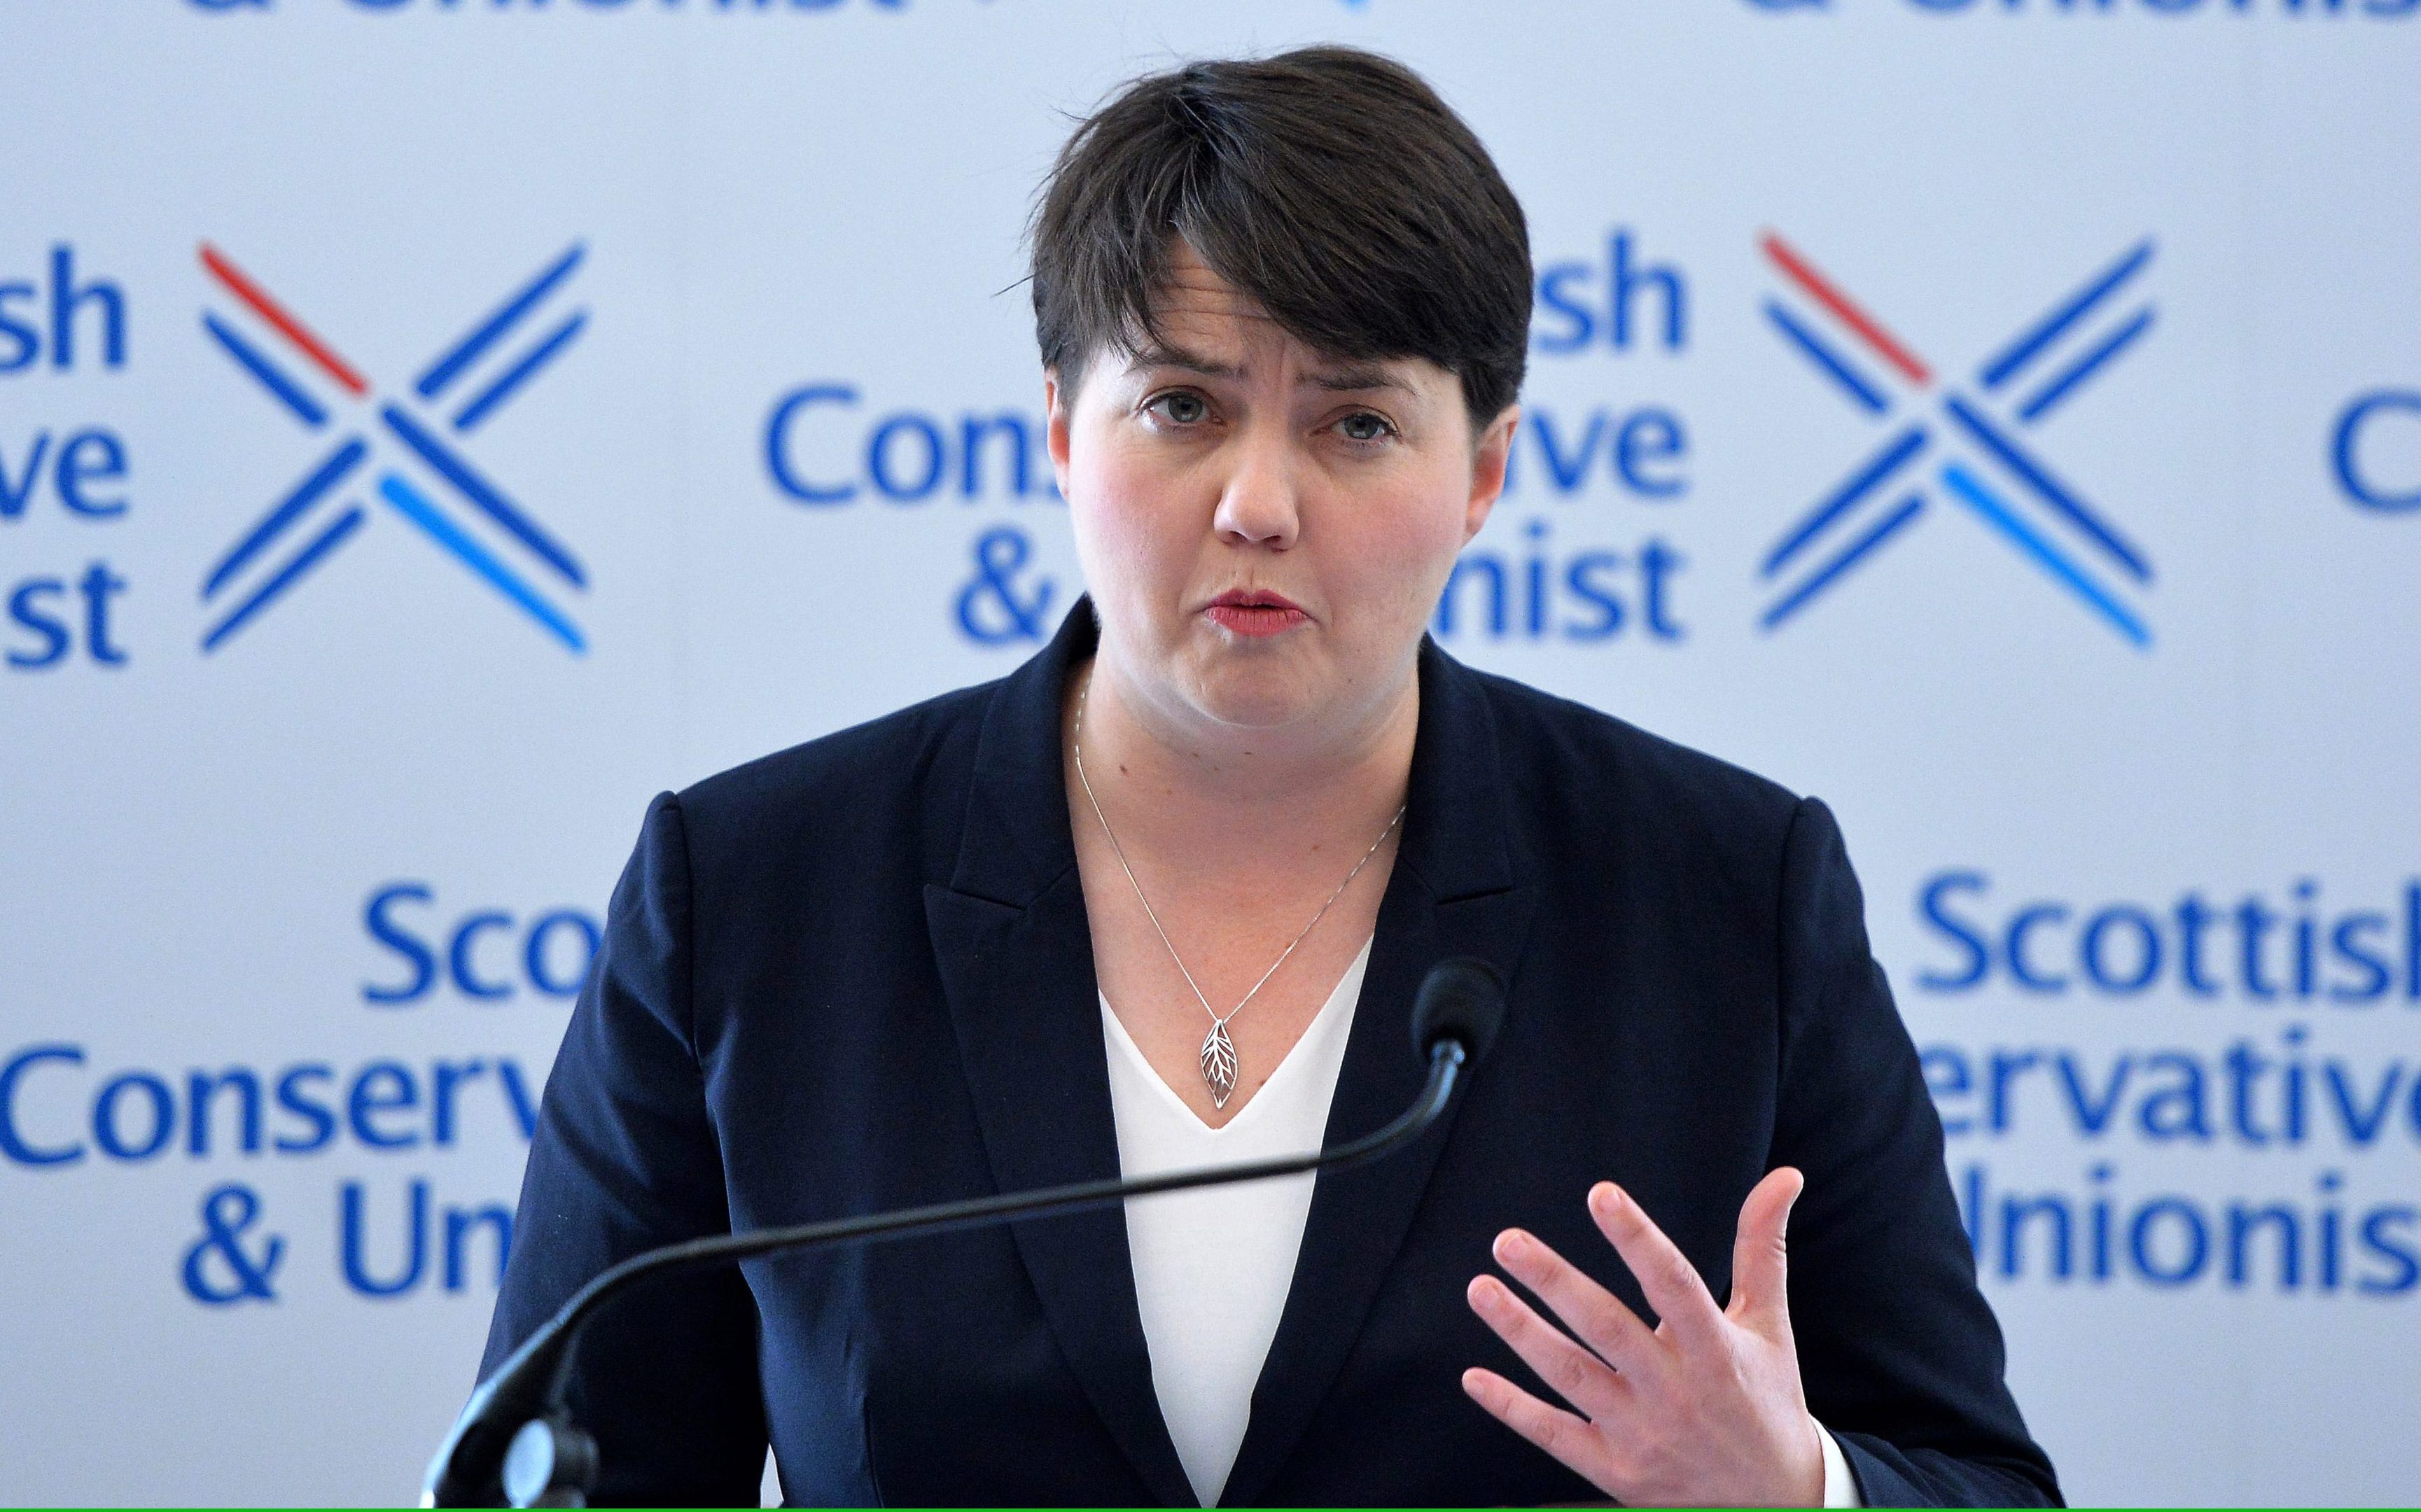 Scottish Conservative Leader Ruth Davidson (Mark Runnacles/Getty Images)